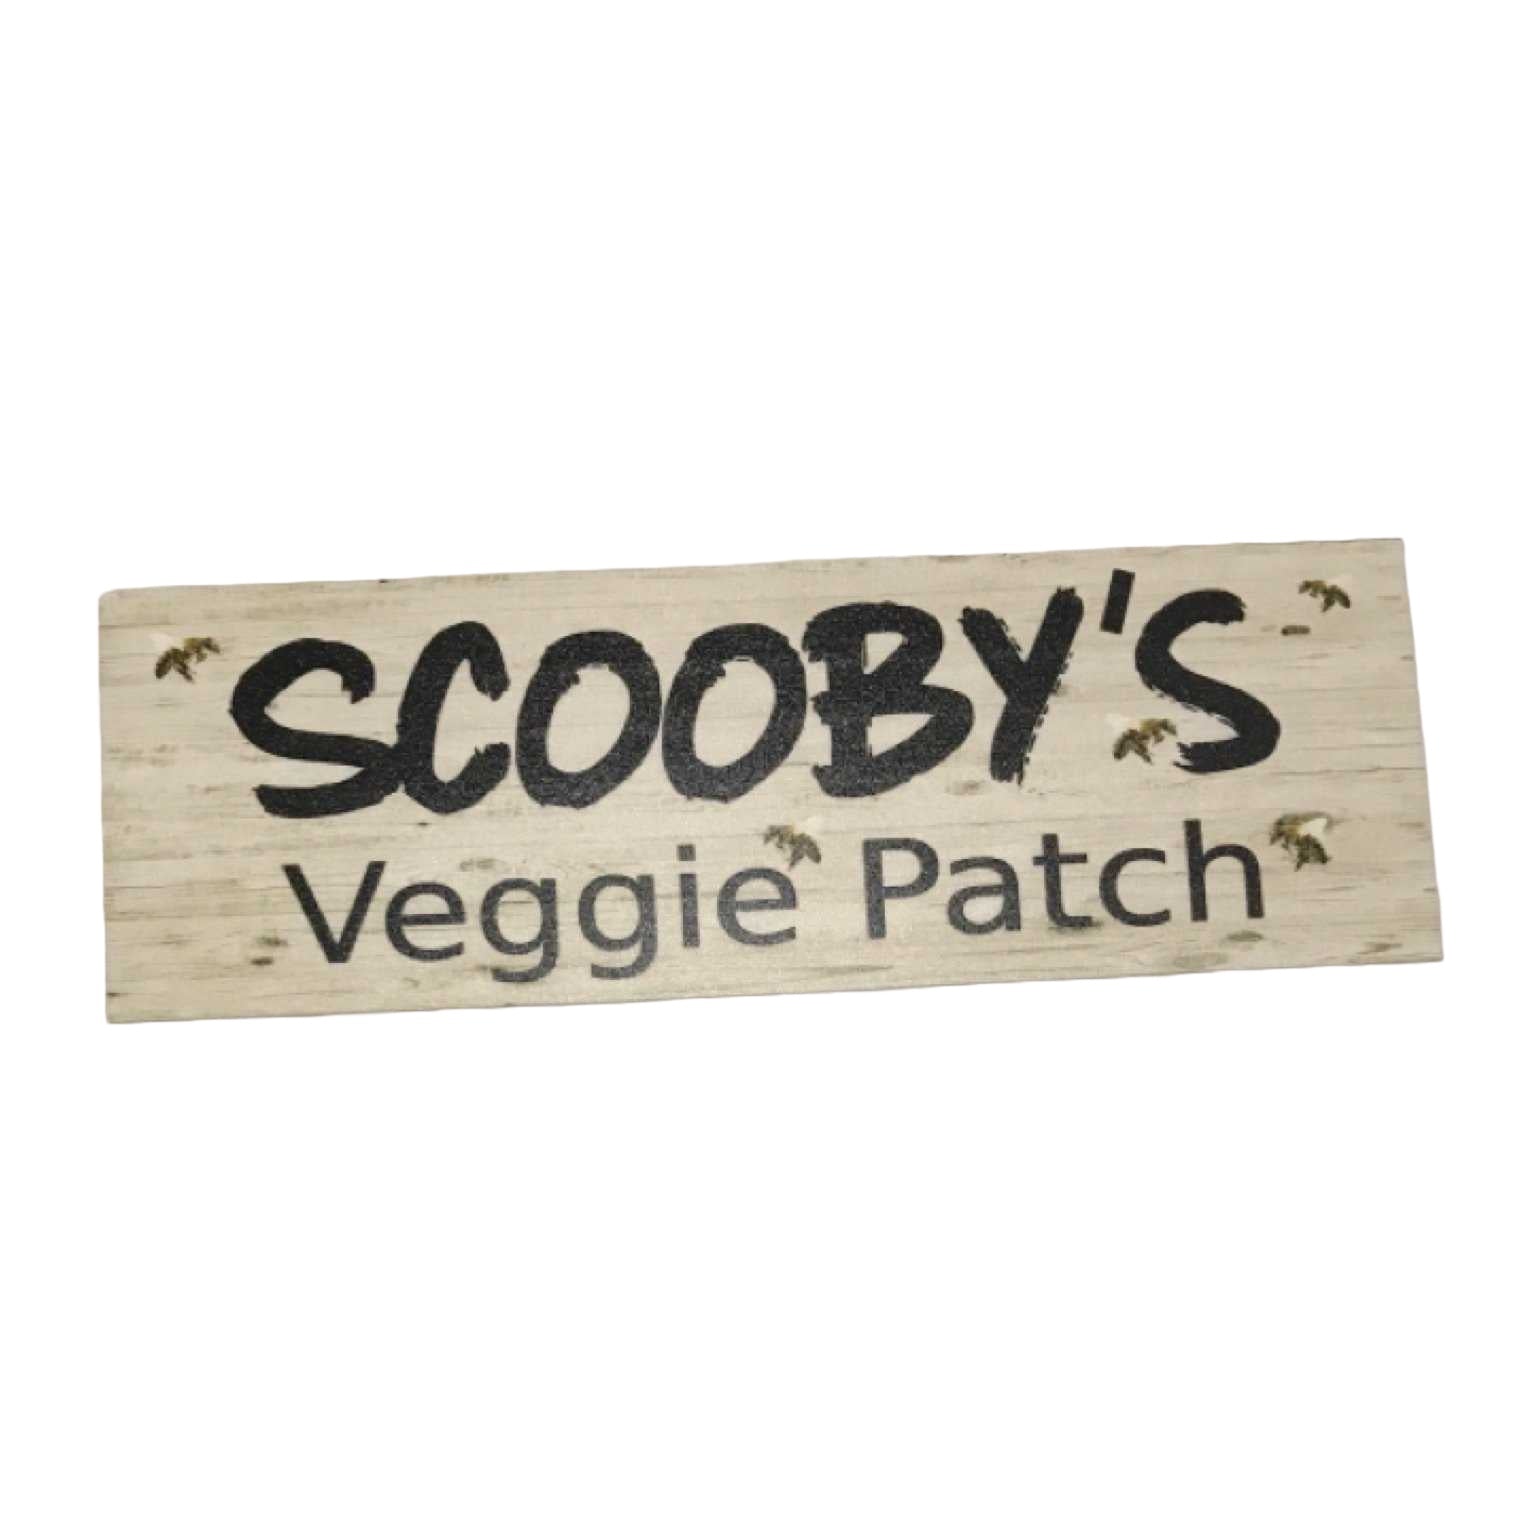 Custom Veggie Patch Garden Bees Sign - The Renmy Store Homewares & Gifts 